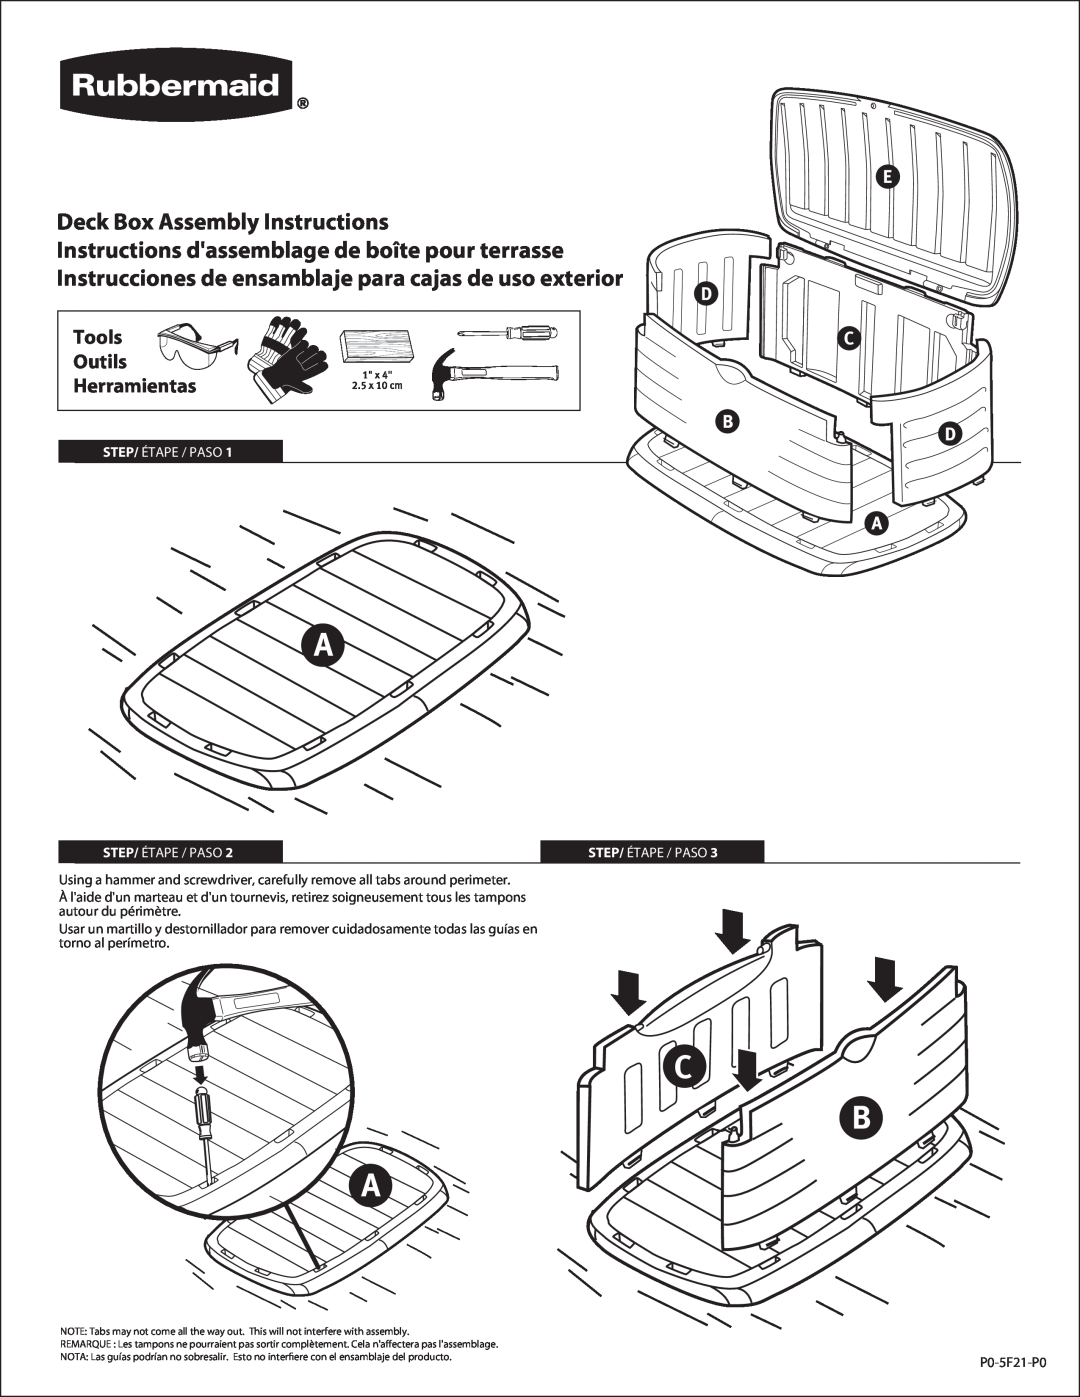 Rubbermaid P0-5F21-P0 manual C B A, Step/ Étape / Paso, Deck Box Assembly Instructions, Tools Outils Herramientas 